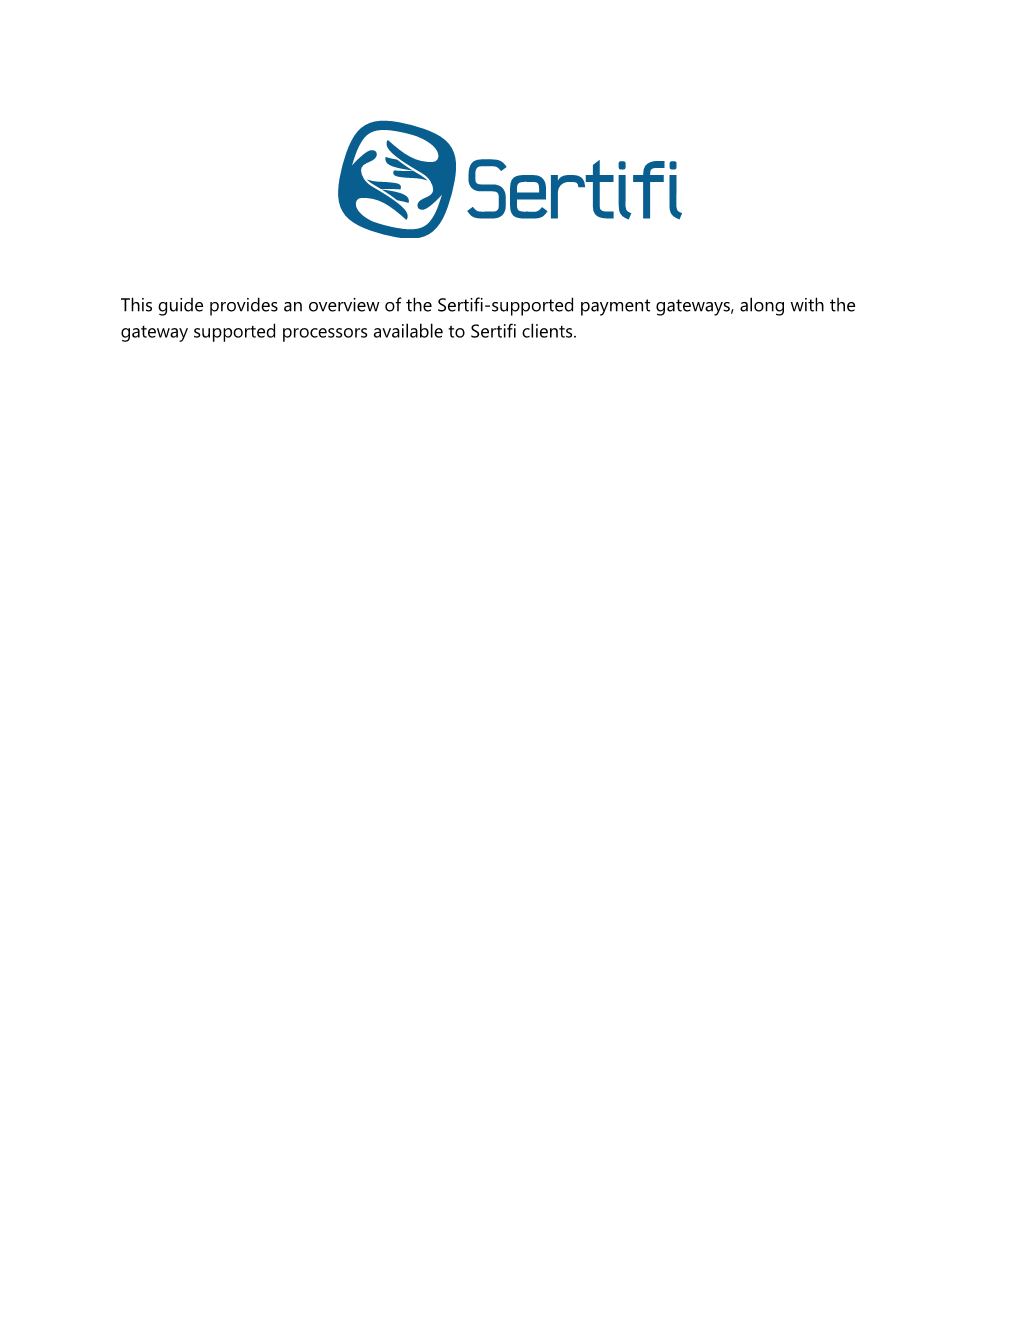 Sertifi Supported Payment Gateways Sertifi Supports Credit Card Authorizations and Transactions with the Following Payment Gateways